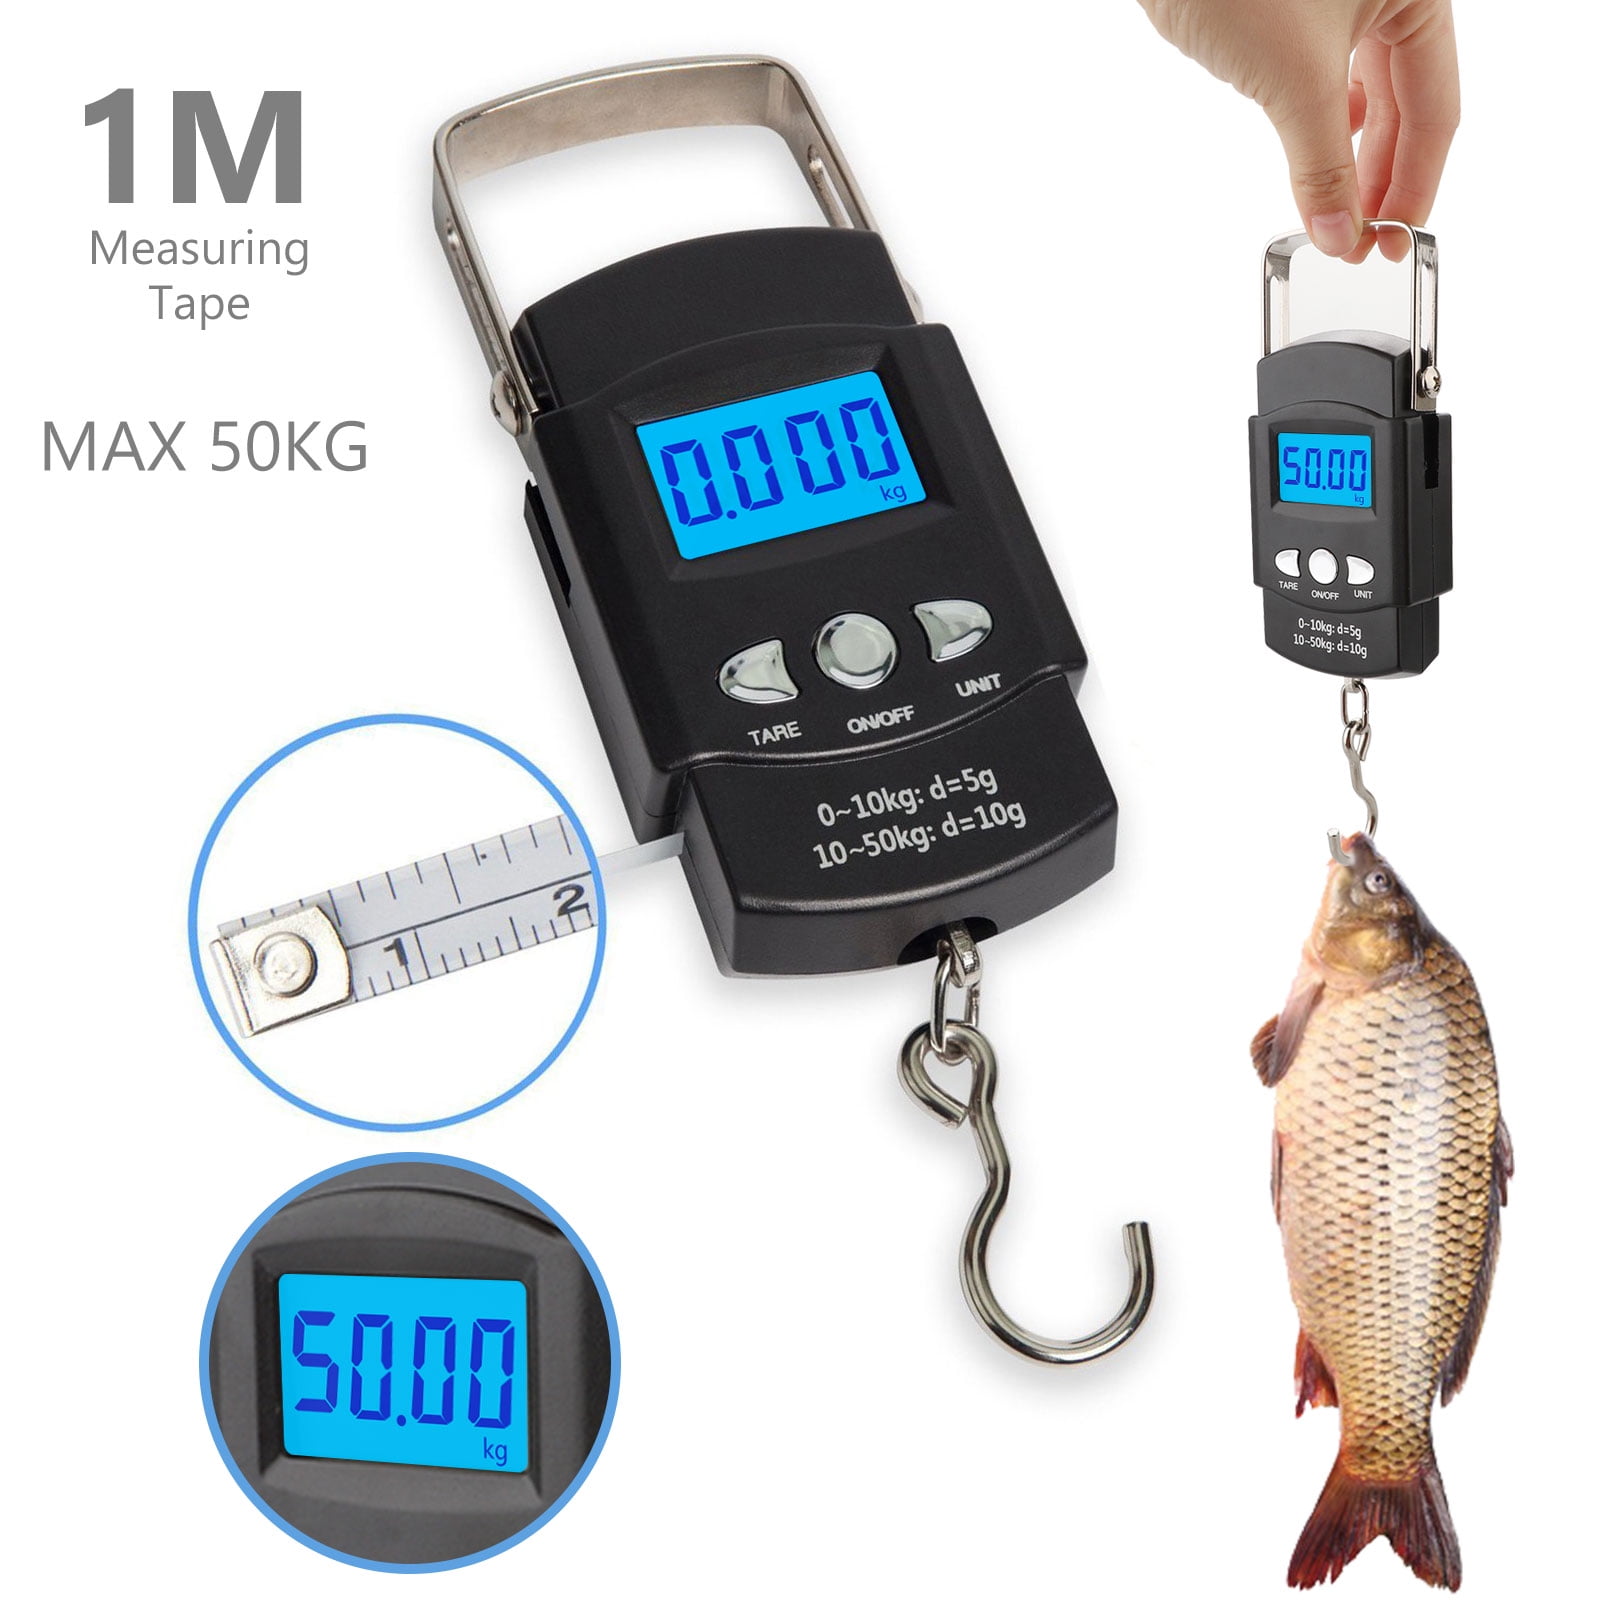 Digital Balance Stainless Steel Scales with LCD Display and Measuring Tape by Icarekit Portable Electronic Fish Hook Hanging Scale